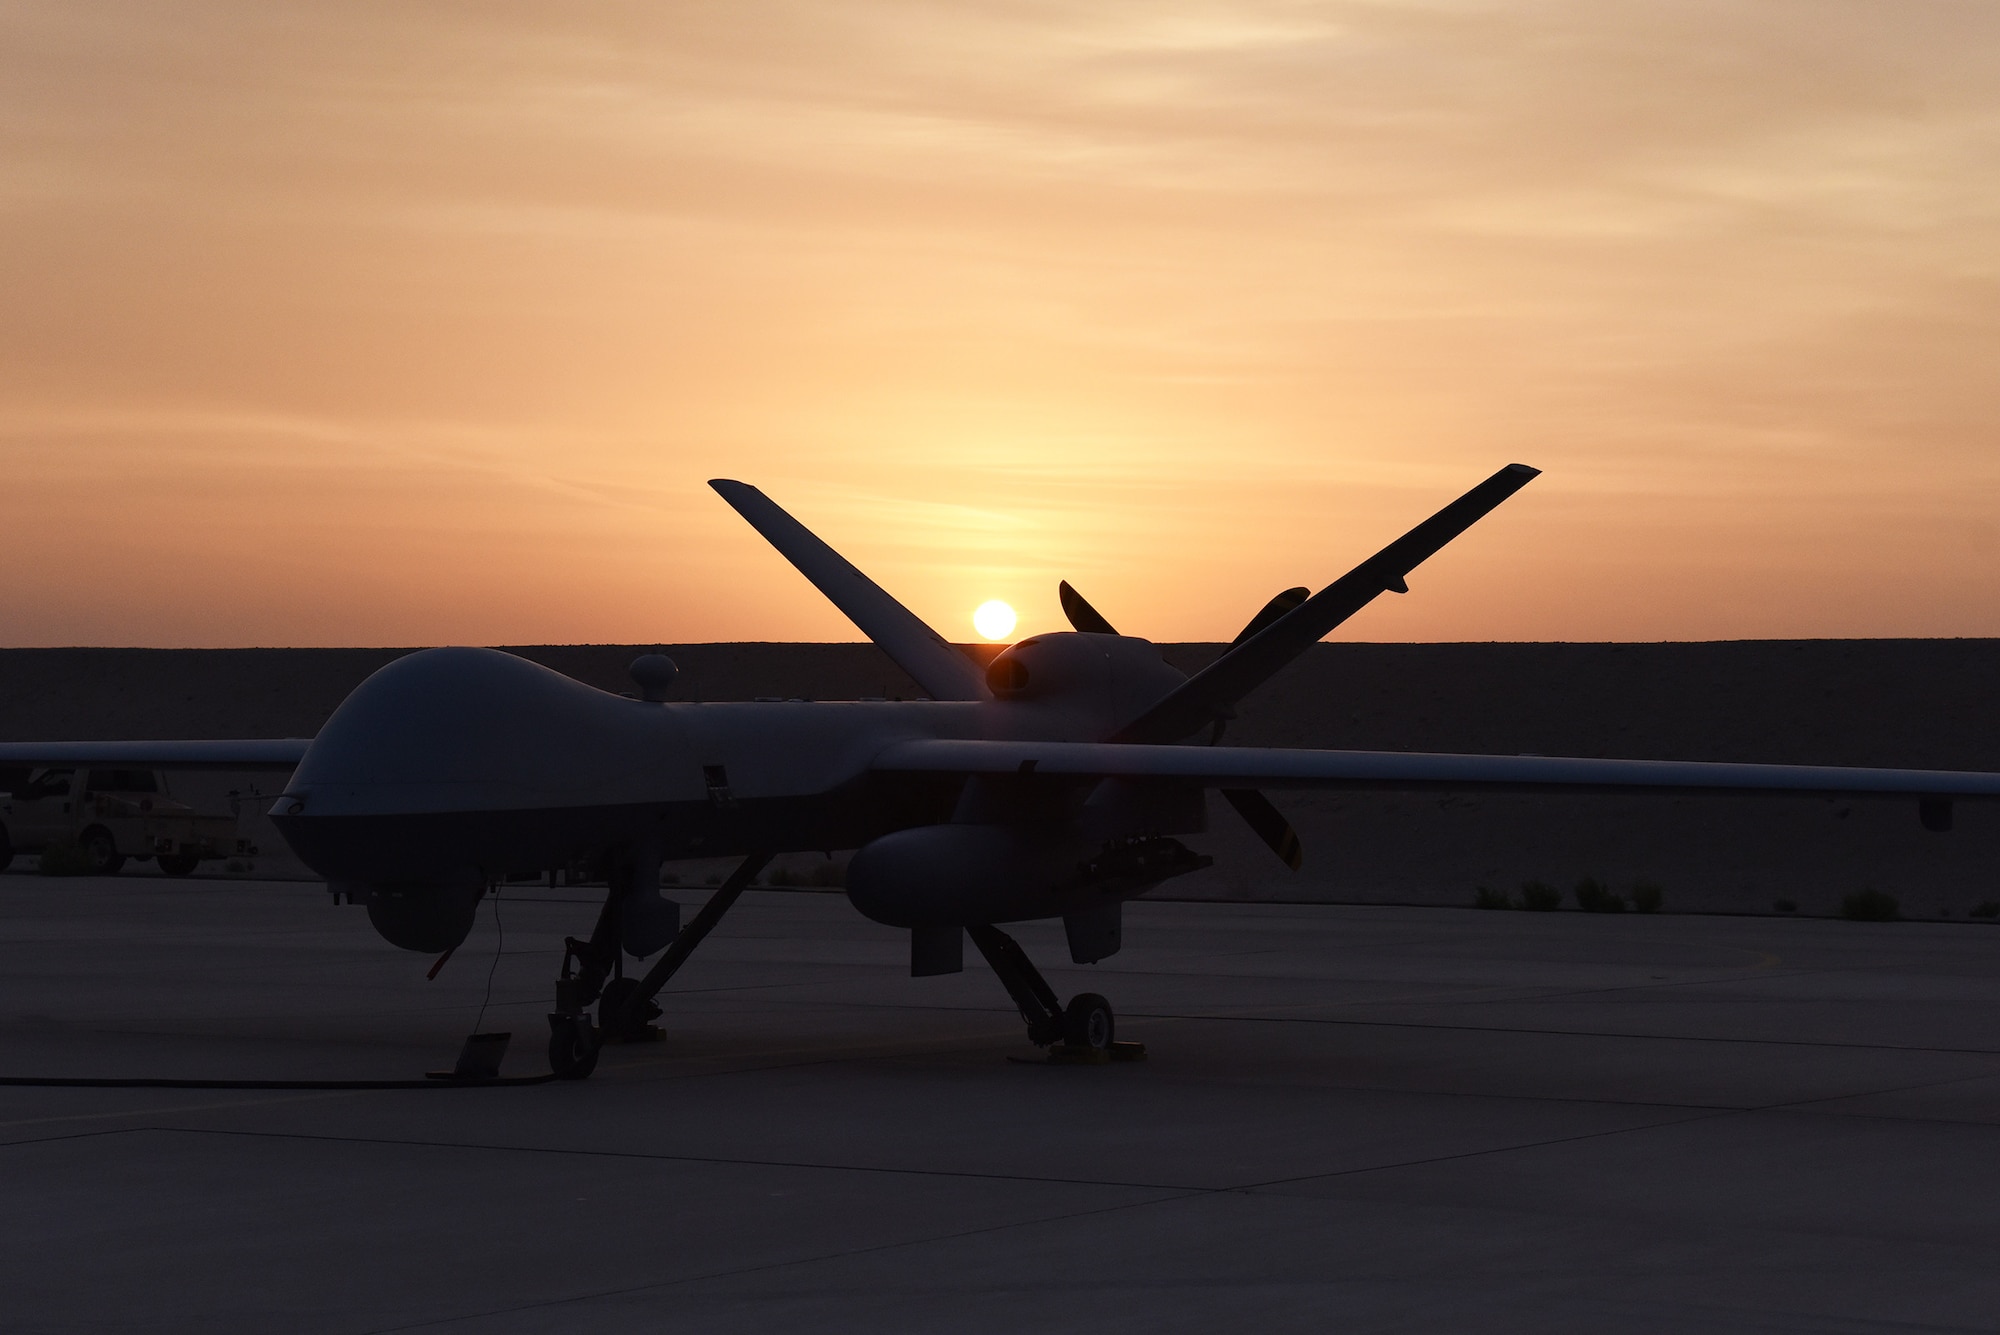 A U.S. Air Force MQ-9 Reaper assigned to the 62nd Expeditionary Attack Squadron at Al Dhafra Air Base, United Arab Emirates, prepares to taxi and launch during Operation Agile Spartan 4 March 10, 2023. Operation Agile Spartan 4 tested Al Dhafra AB’s Multi-Capable Airmen’s abilities to launch, receive, and recover air frames in remote locations. (U.S. Air Force photo by Tech. Sgt. Chris Jacobs/released)